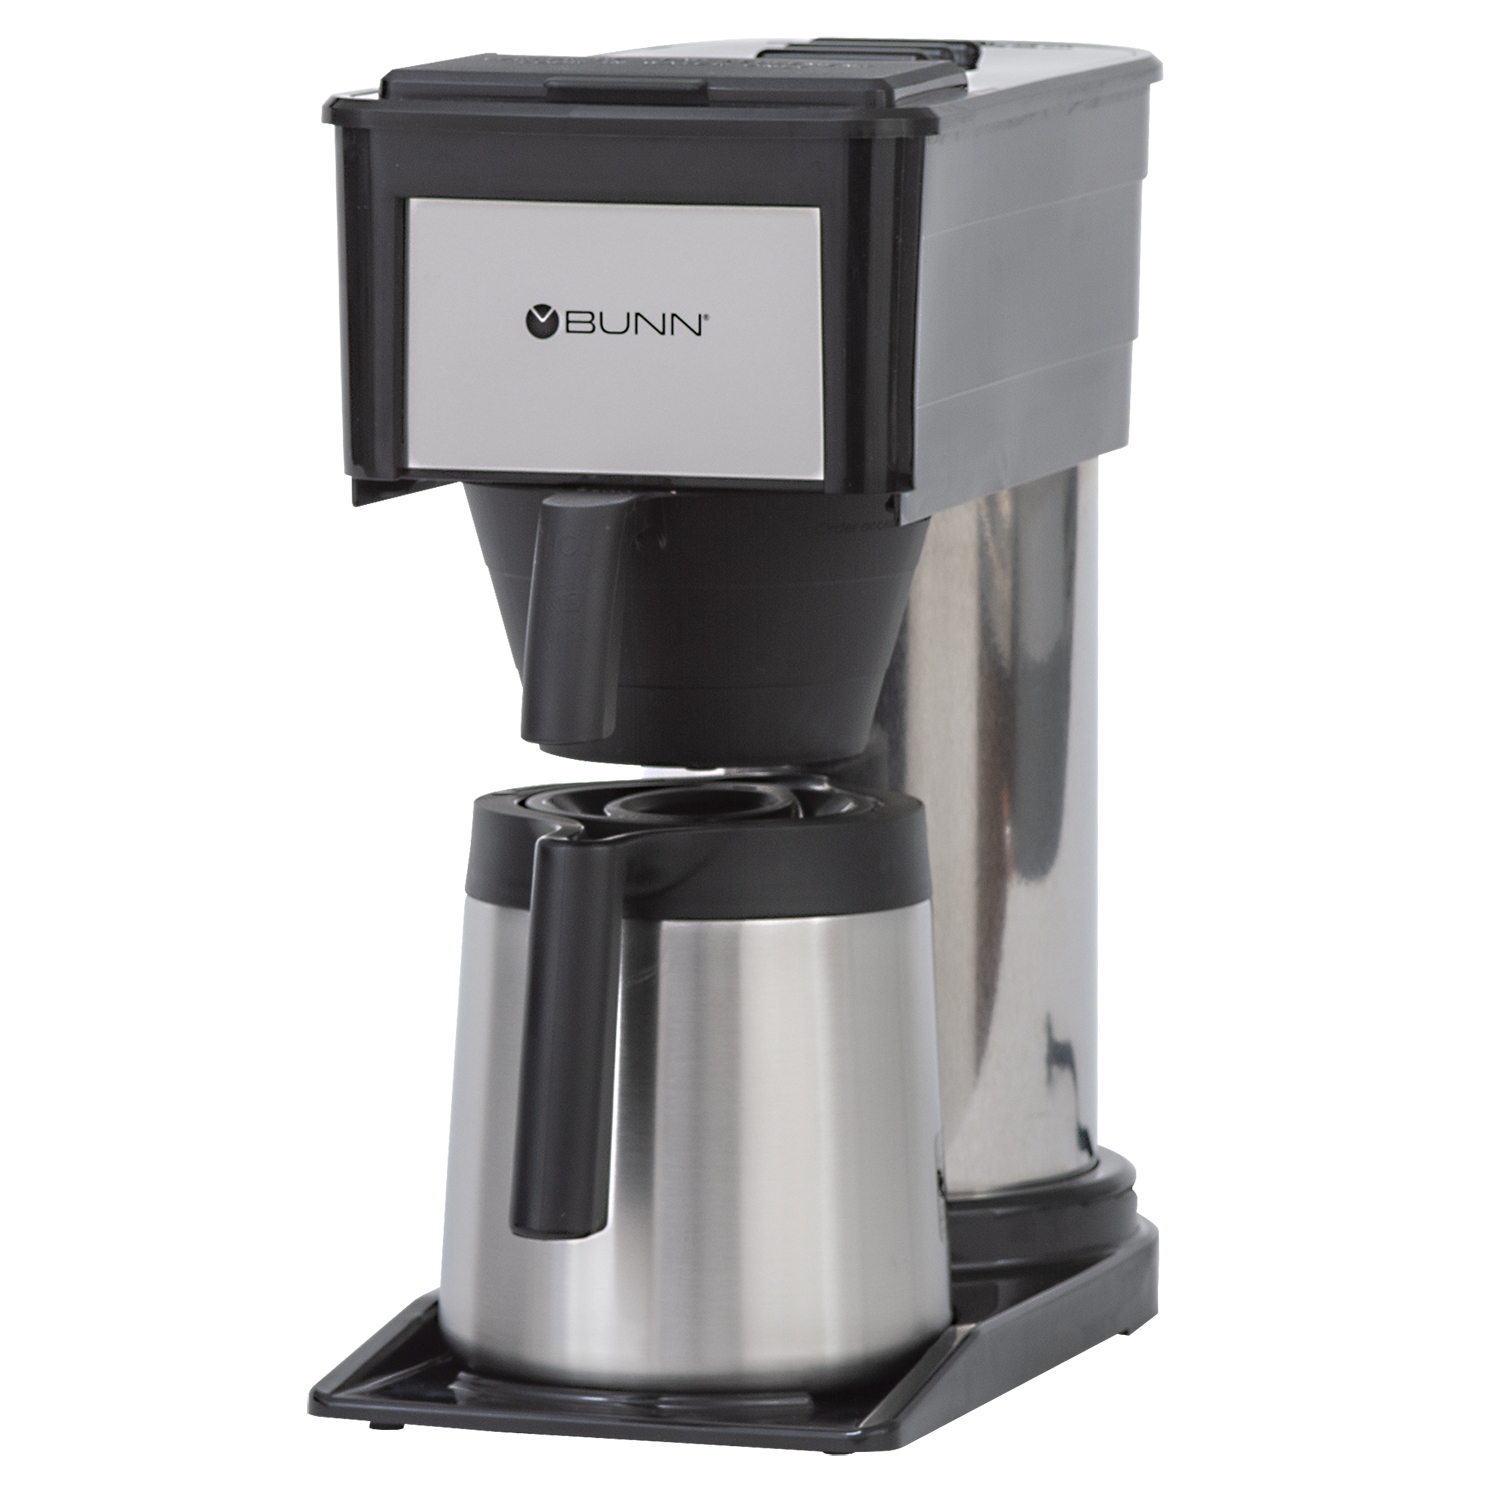 BUNN, BTX 10 Cup Black Thermal Coffee Maker (Condition: New) - image 3 of 5